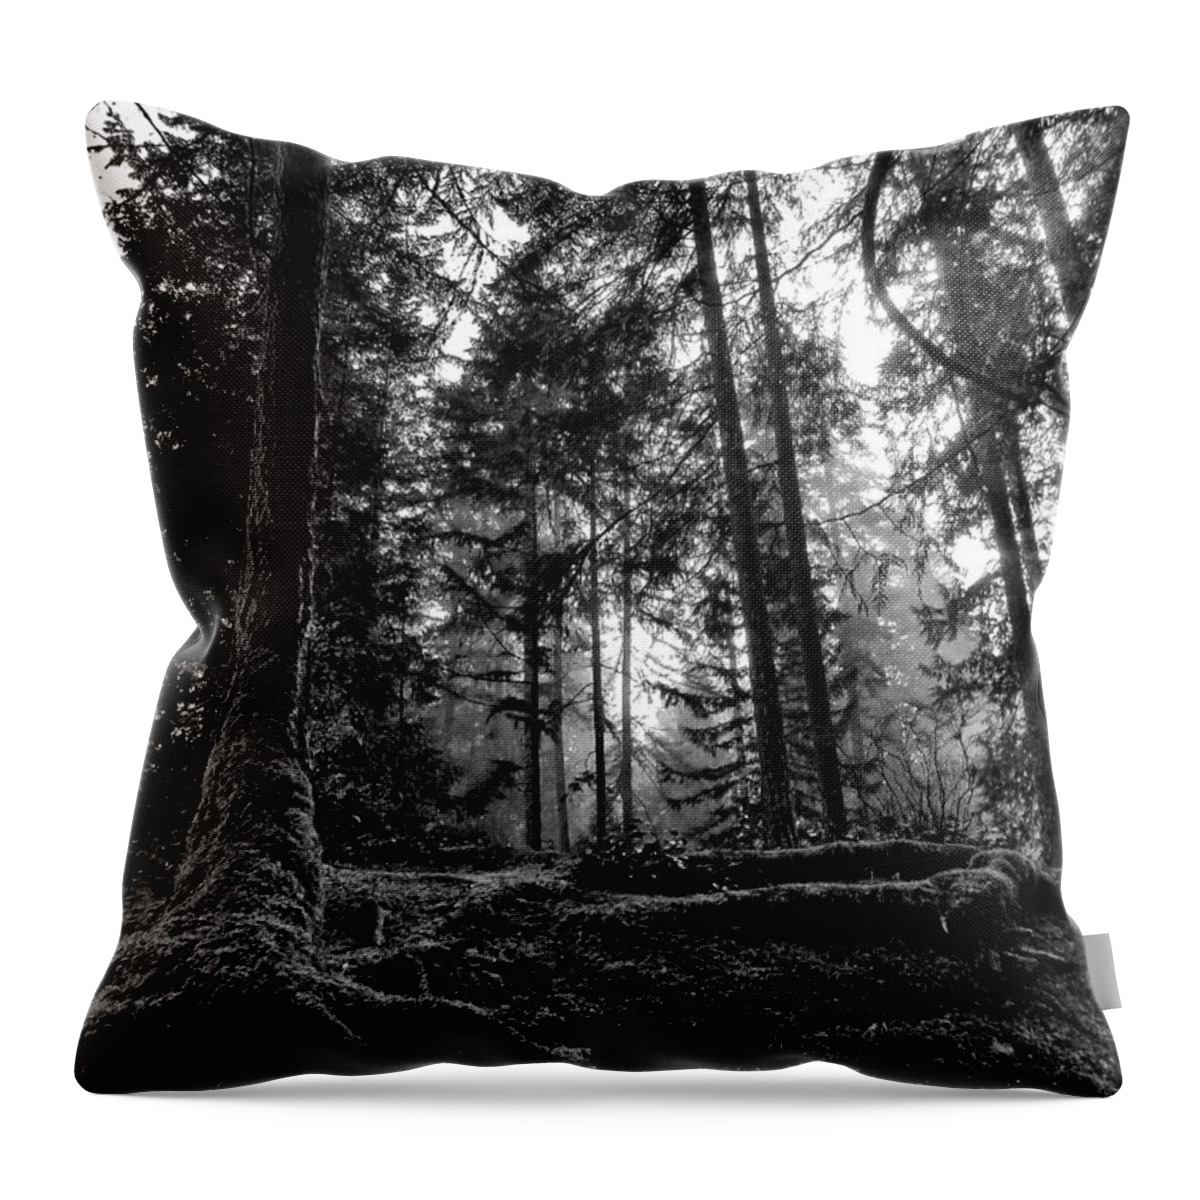 Connie Handscomb Throw Pillow featuring the photograph Stillpoint by Connie Handscomb